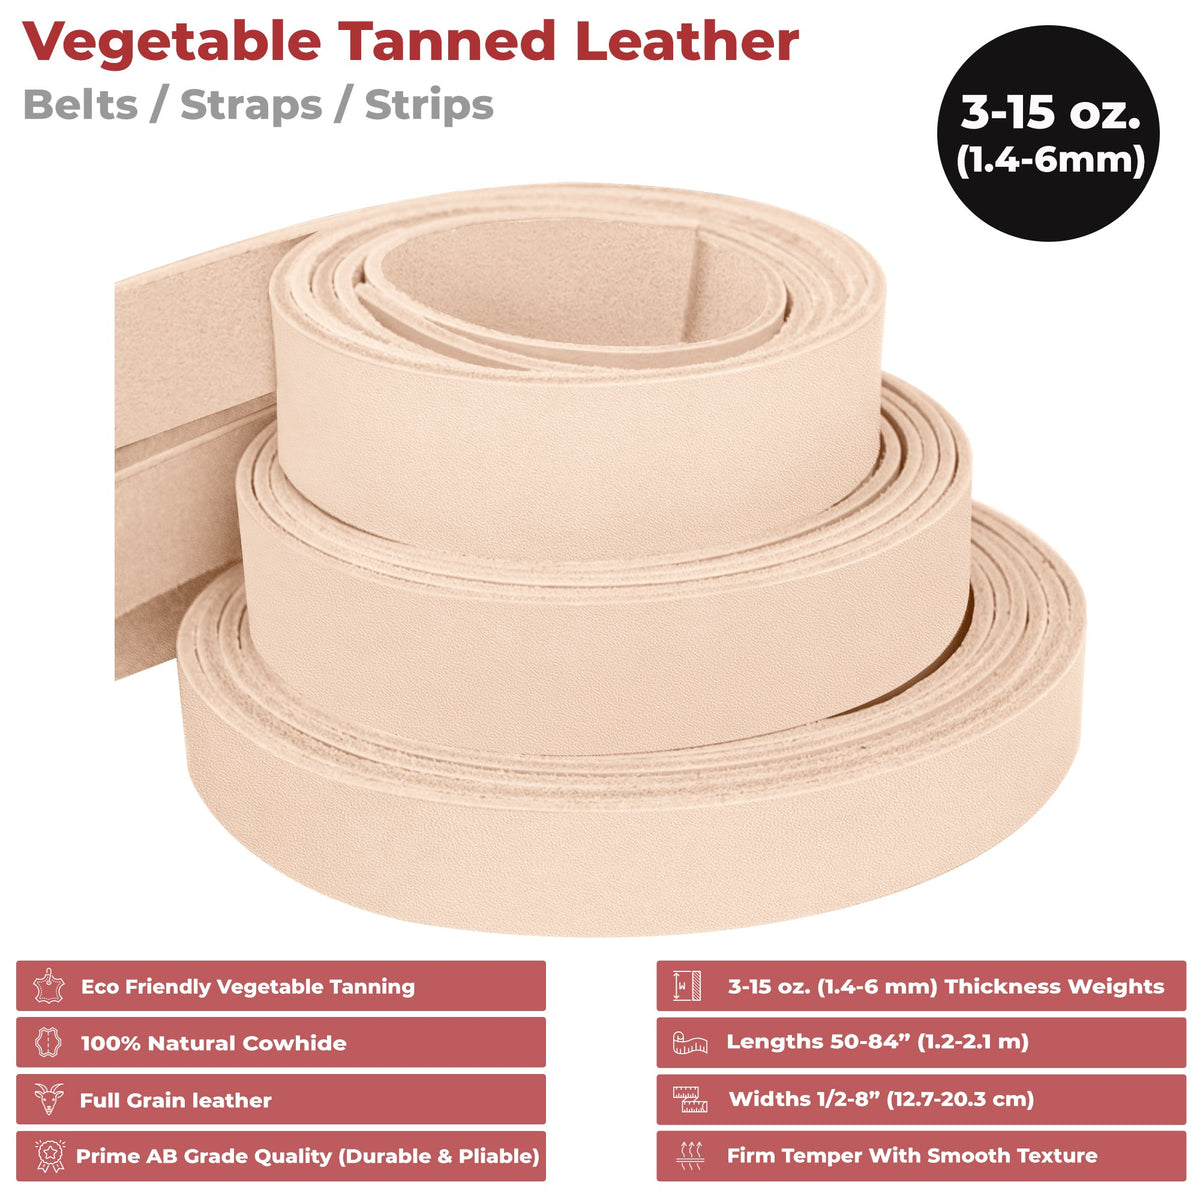 ELW Belt Blanks Strips/Straps 8/9 oz. 3.2-3.6mm Thickness Size 1-1/4x72  Full Grain Import Natural Cowhide Vegetable Tanned Leather for Tooling,  Engraving, Embossing, Molding, & Dyeing 